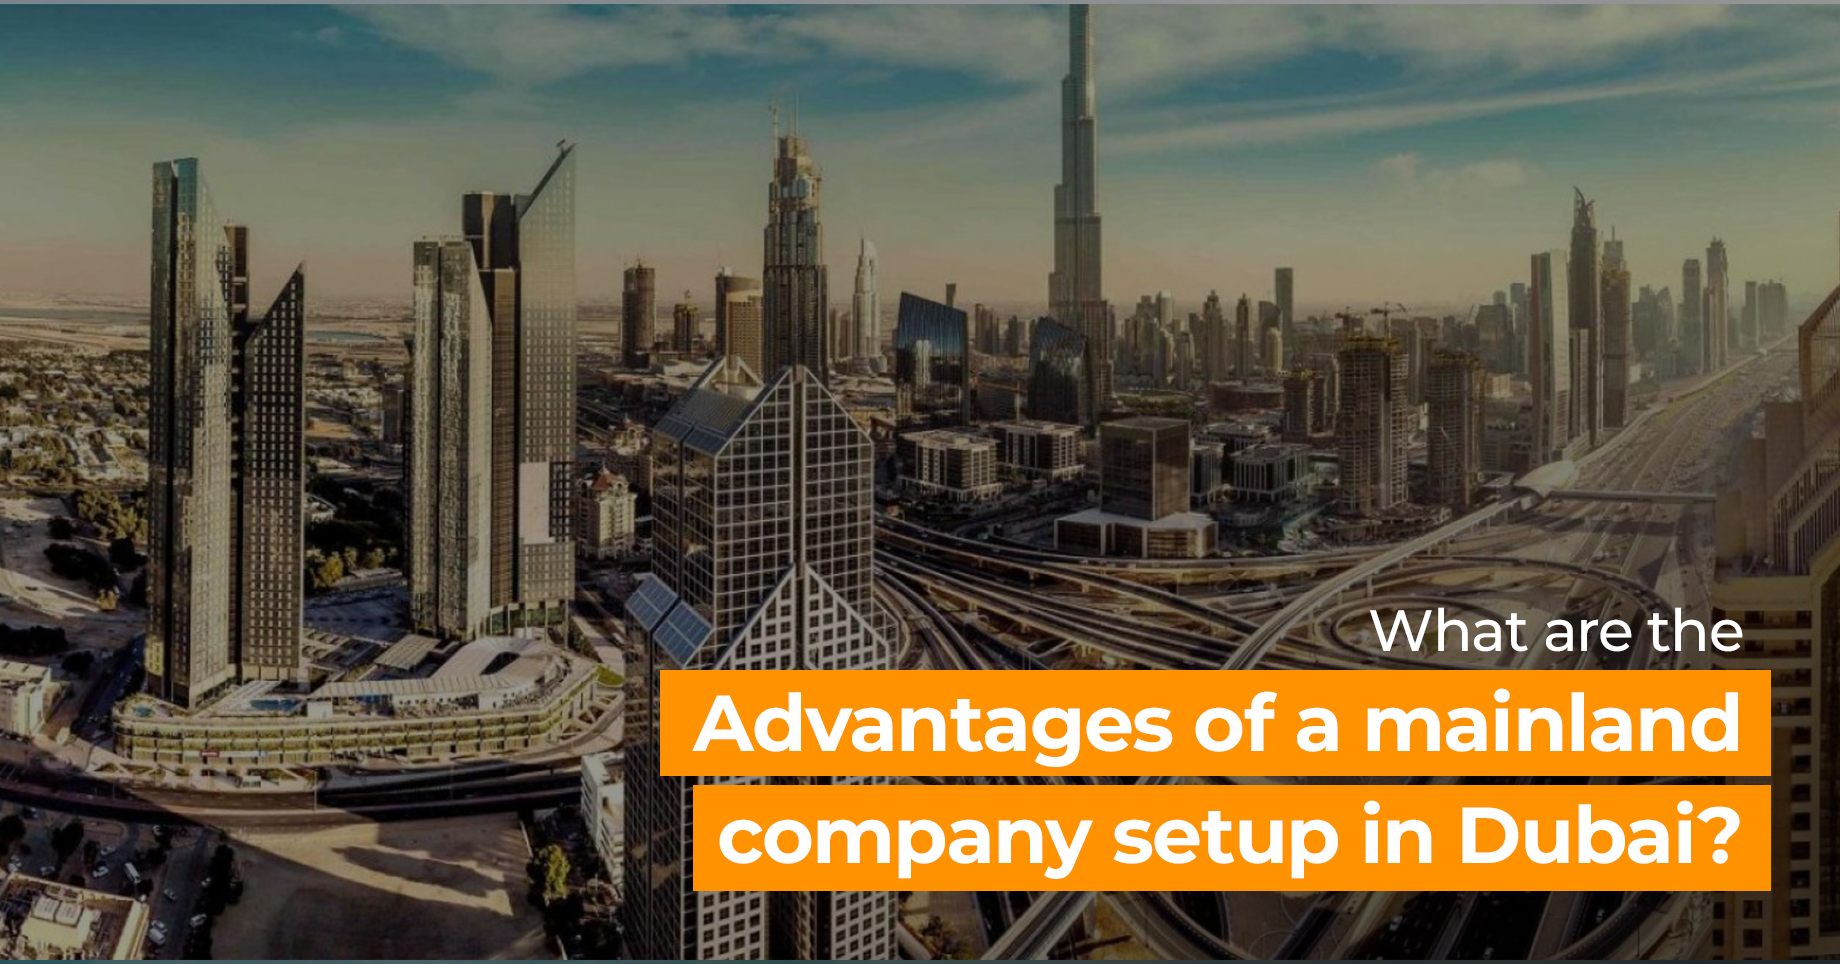 Advantages of Setting Up a Mainland Company in Dubai